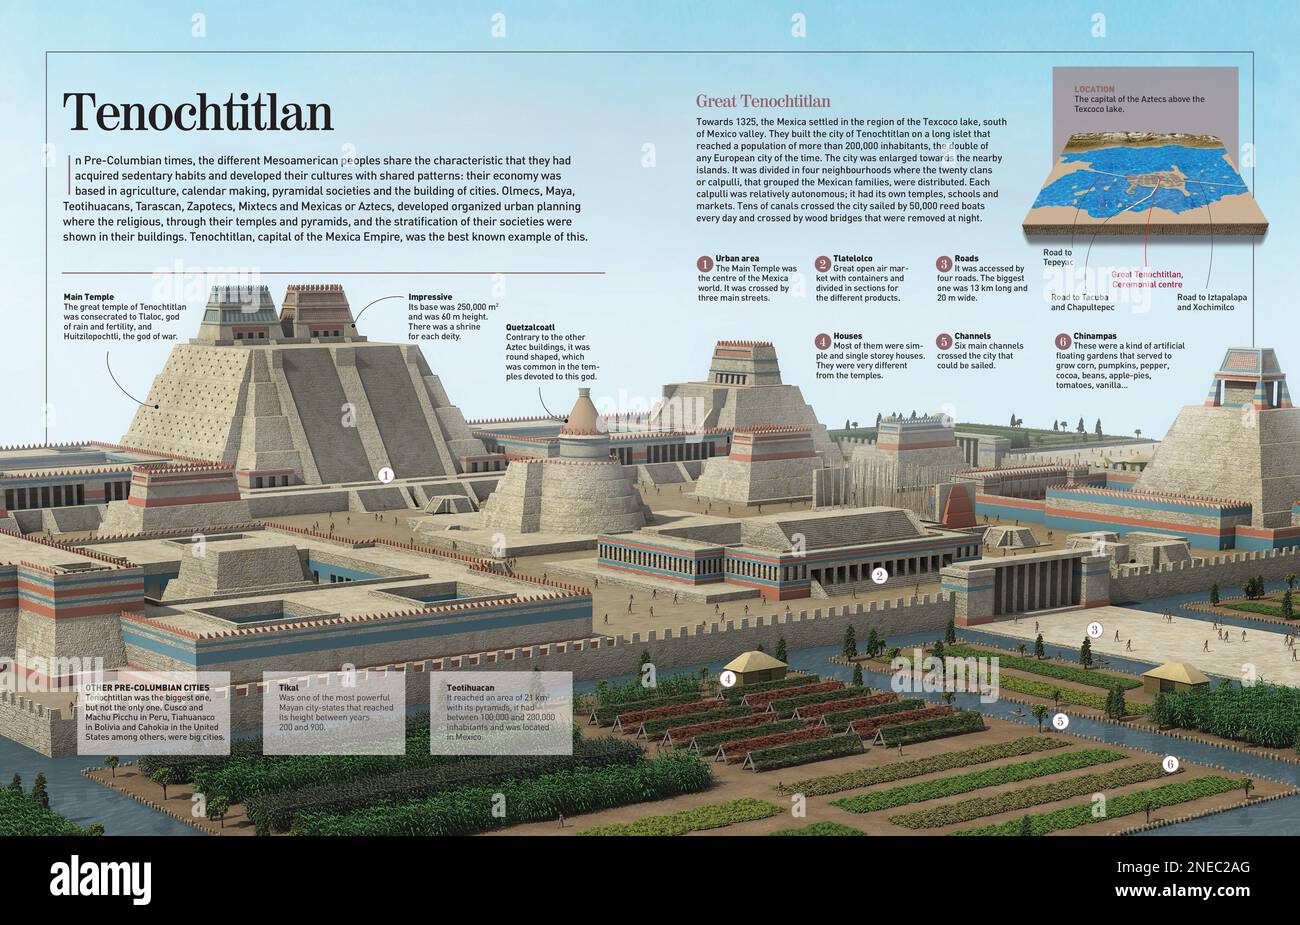 Infographic about the Mesoamerican city of Tenochtitlan, built in 1325 by the Mexicans (Aztecs), an example of the Pre-Columbine civilisations development. [Adobe InDesign (.indd); 4960x8503]. Stock Photo